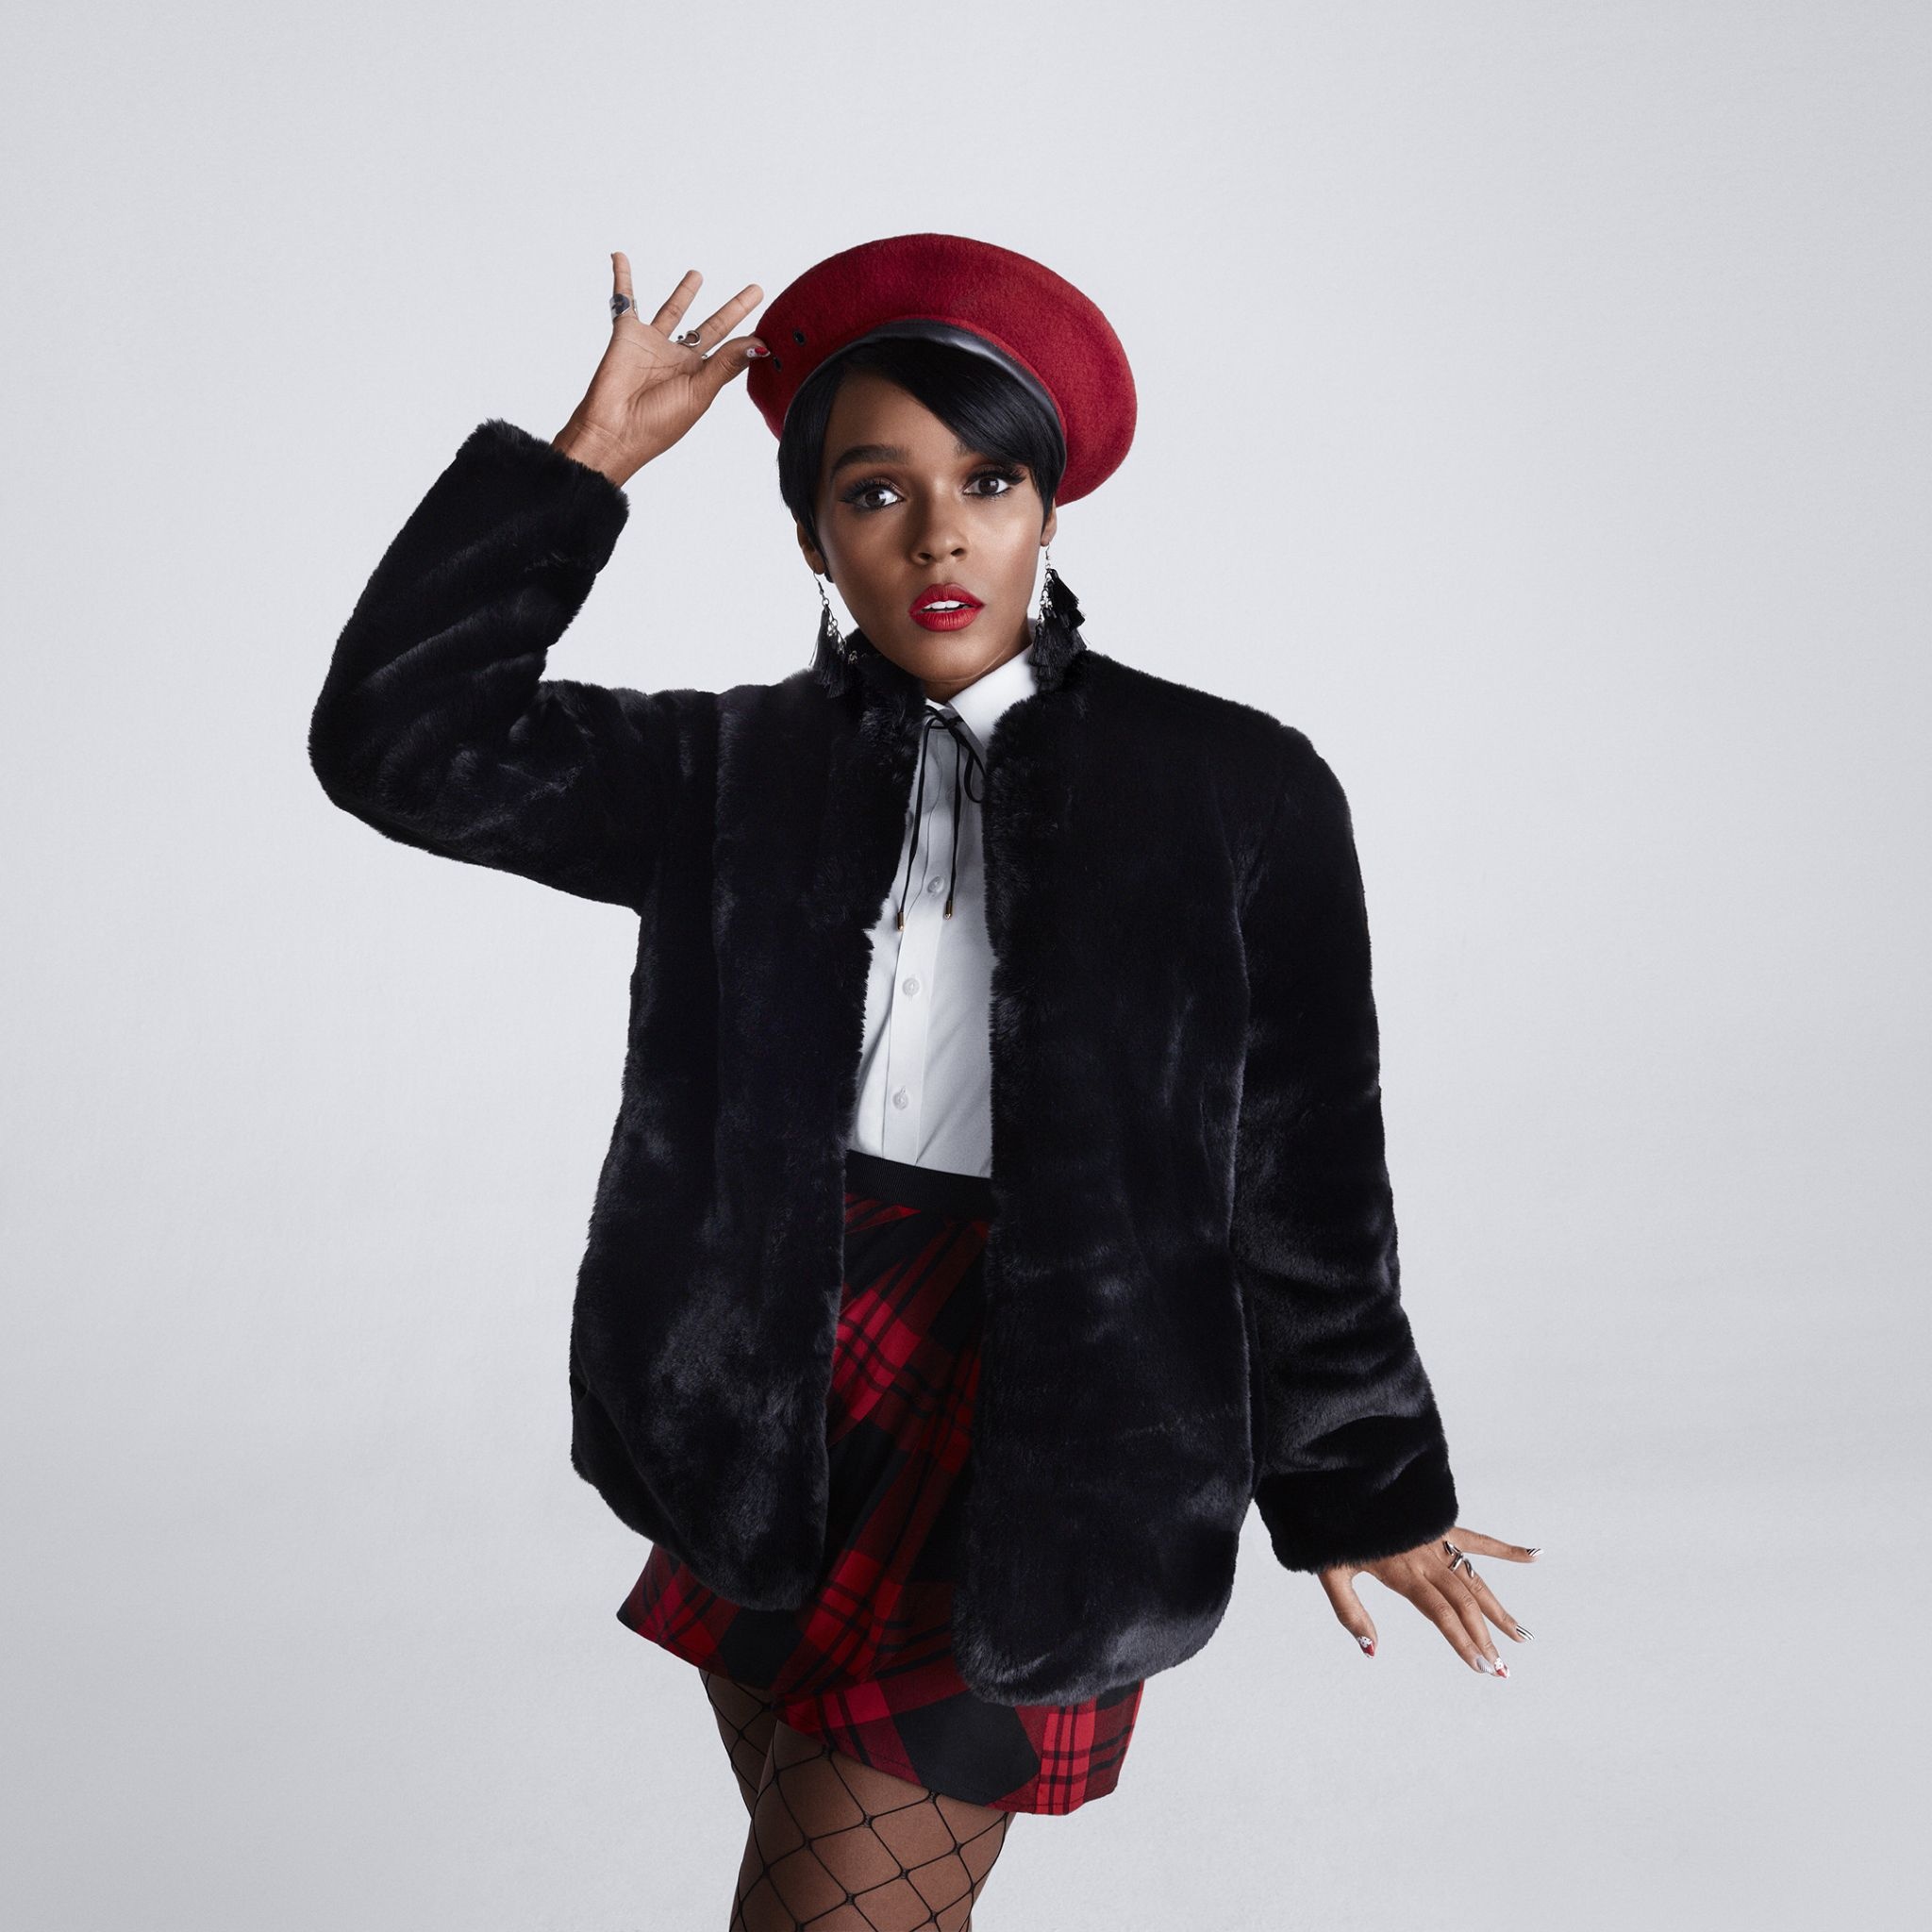 Janelle Monae creative wallpapers backgrounds, 2050x2050 HD Handy